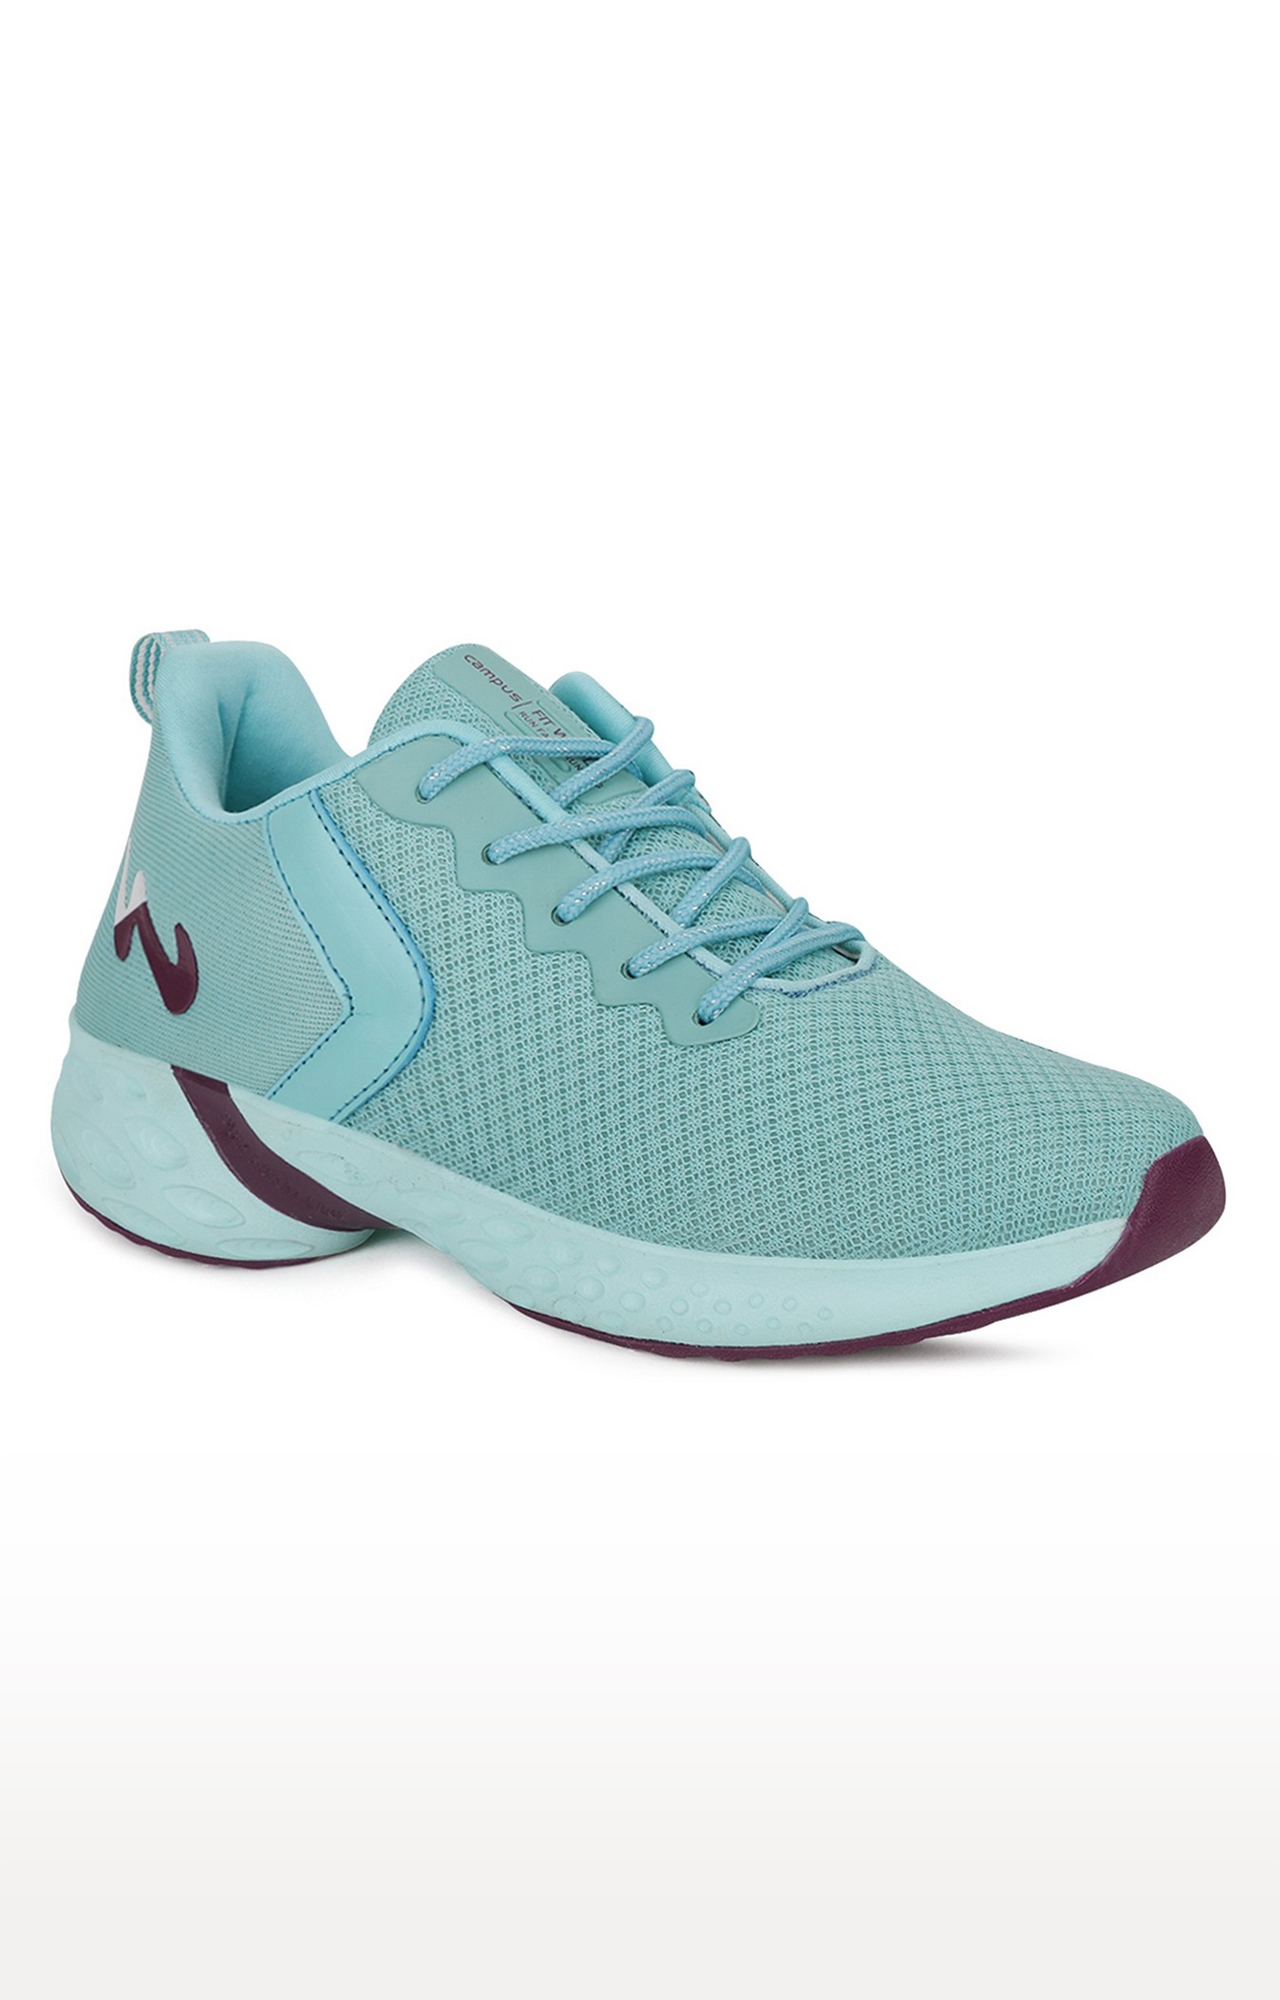 Campus Shoes | Light Blue Alice Running Shoes